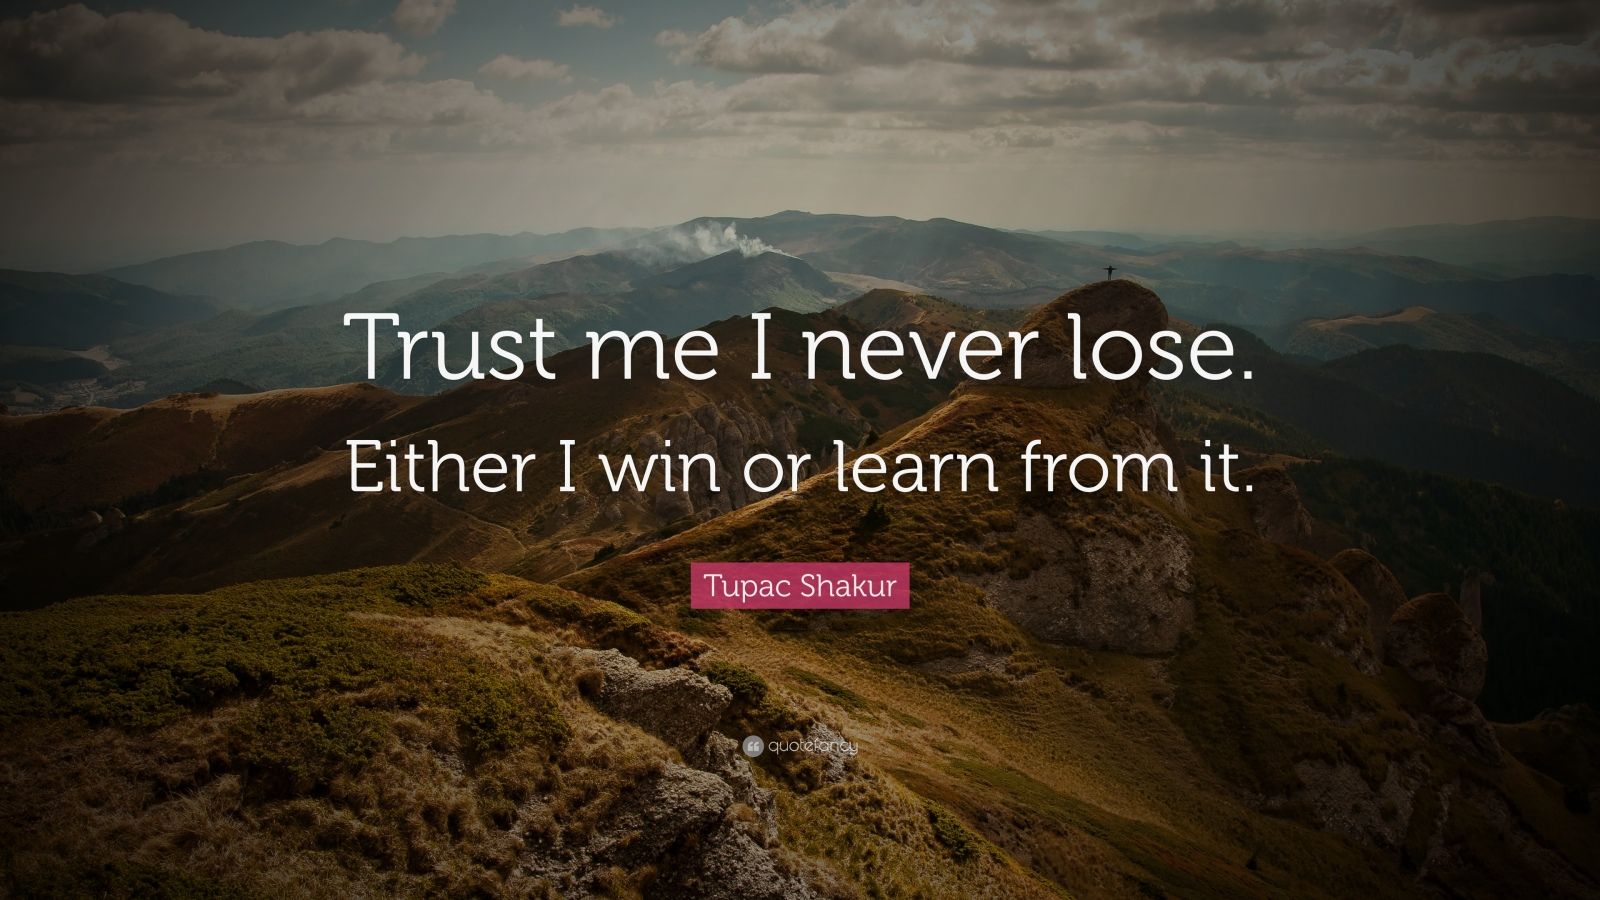 Tupac Shakur Quote: “Trust me I never lose. Either I win or learn from it.”